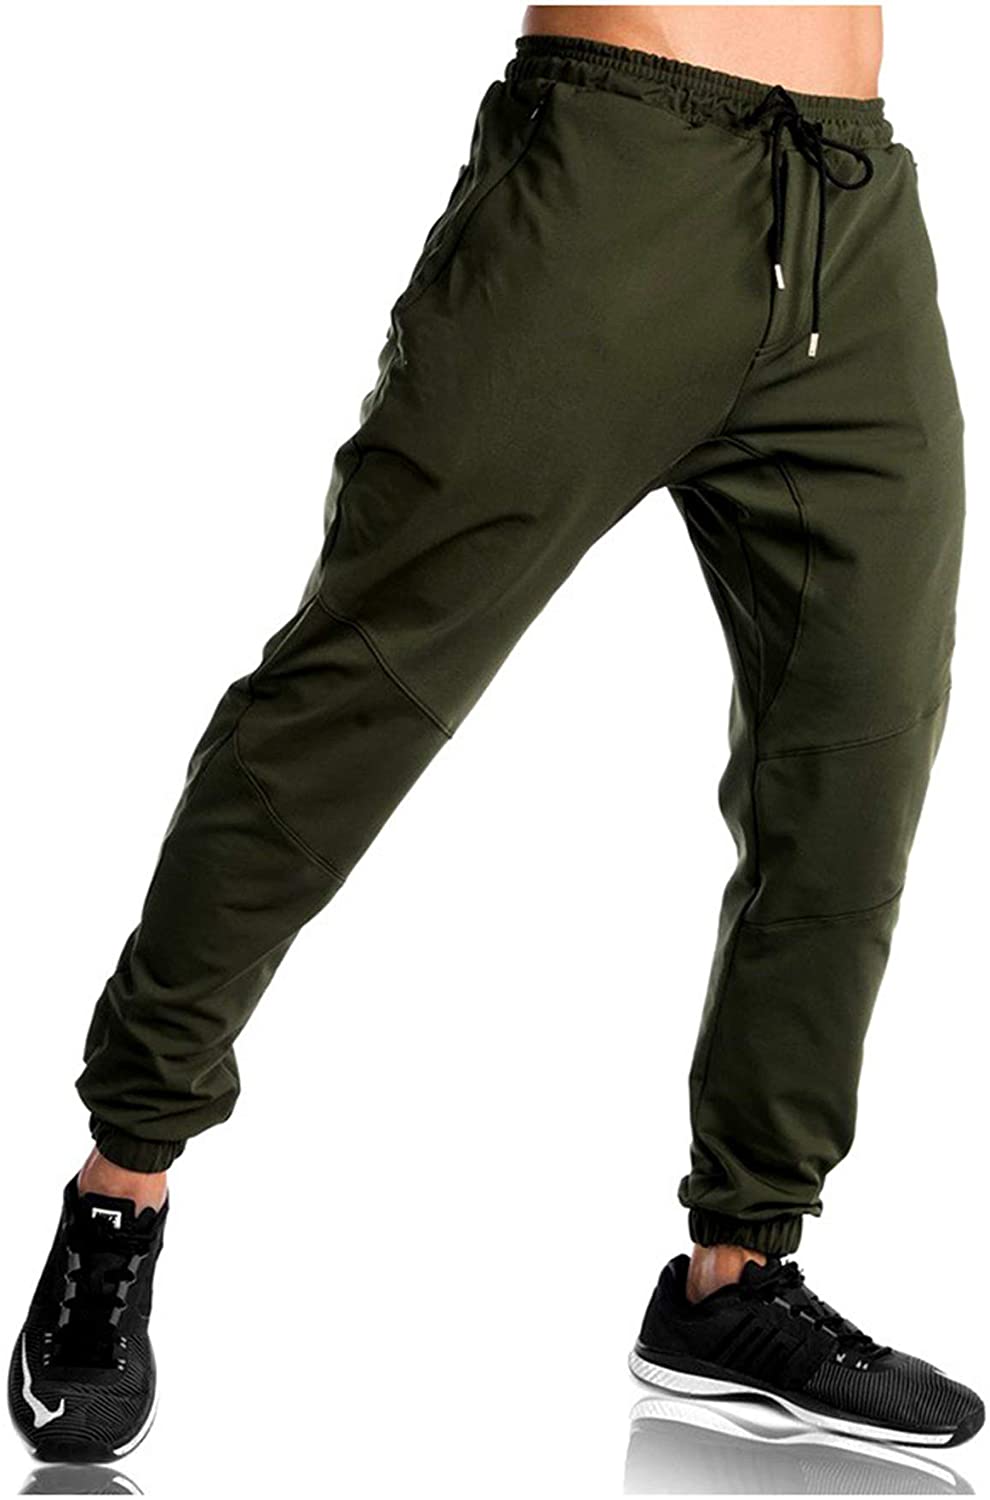 TBMPOY Men's Tapered Joggers Athletic Running Workout Track Pants